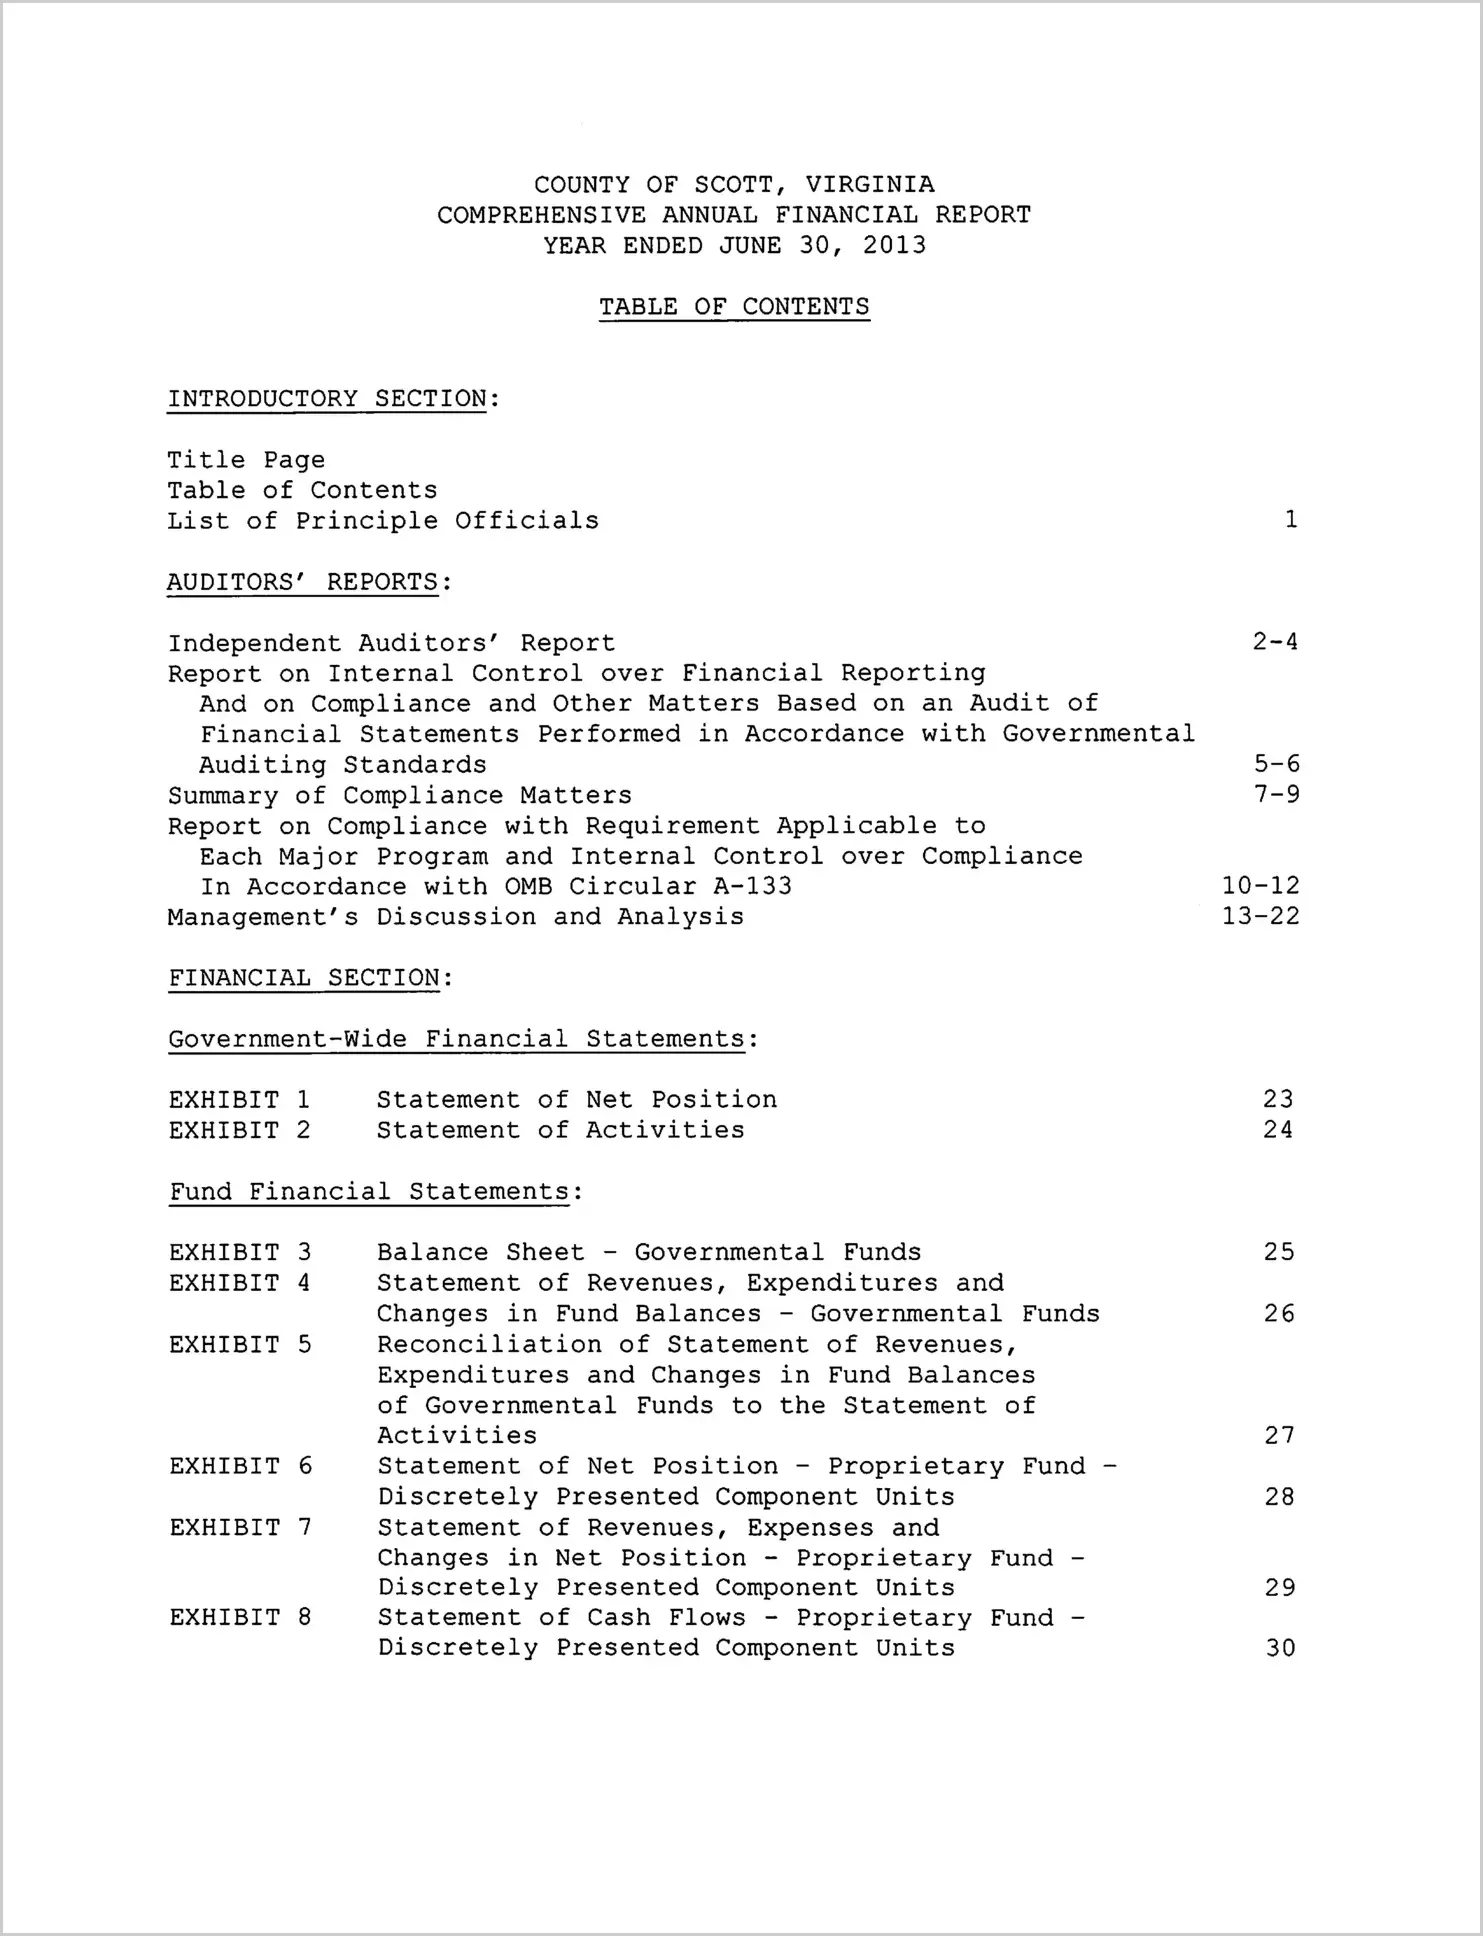 2013 Annual Financial Report for County of Scott